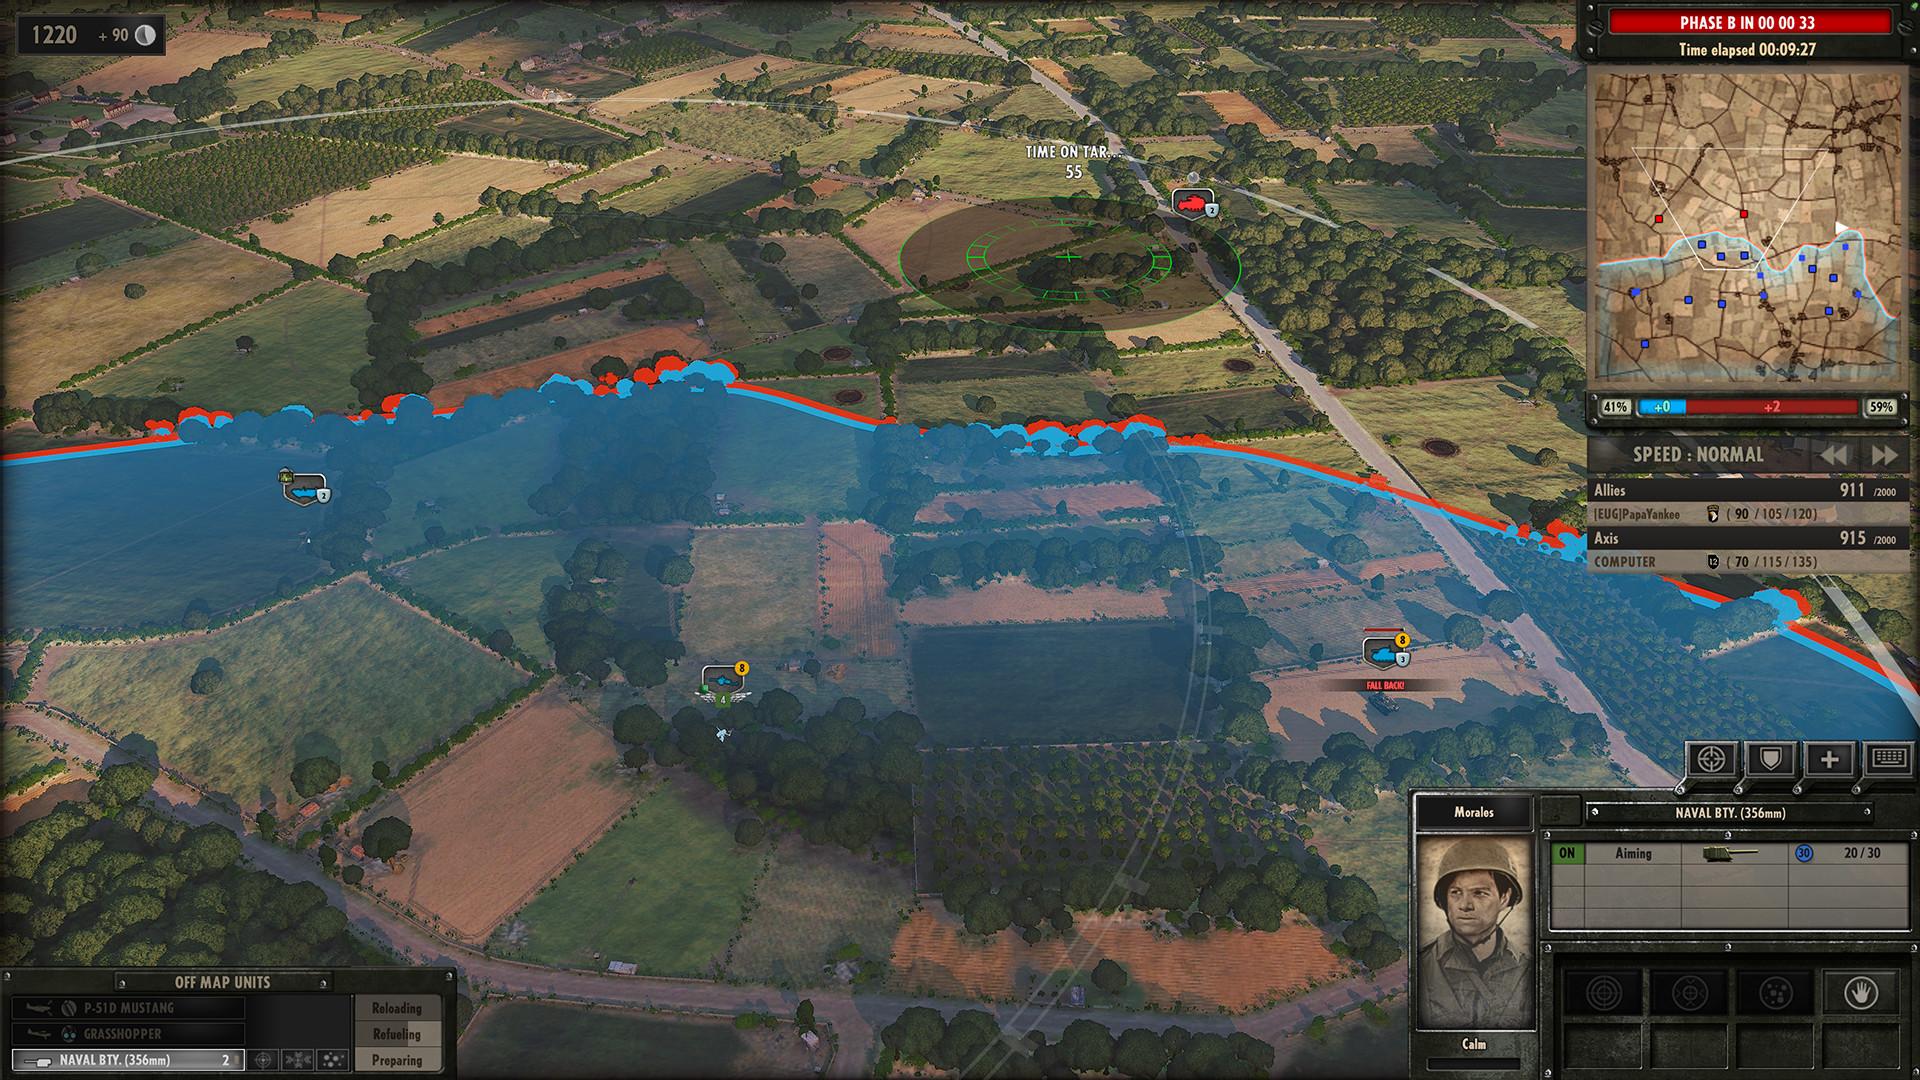 Screenshot №3 from game Steel Division: Normandy 44